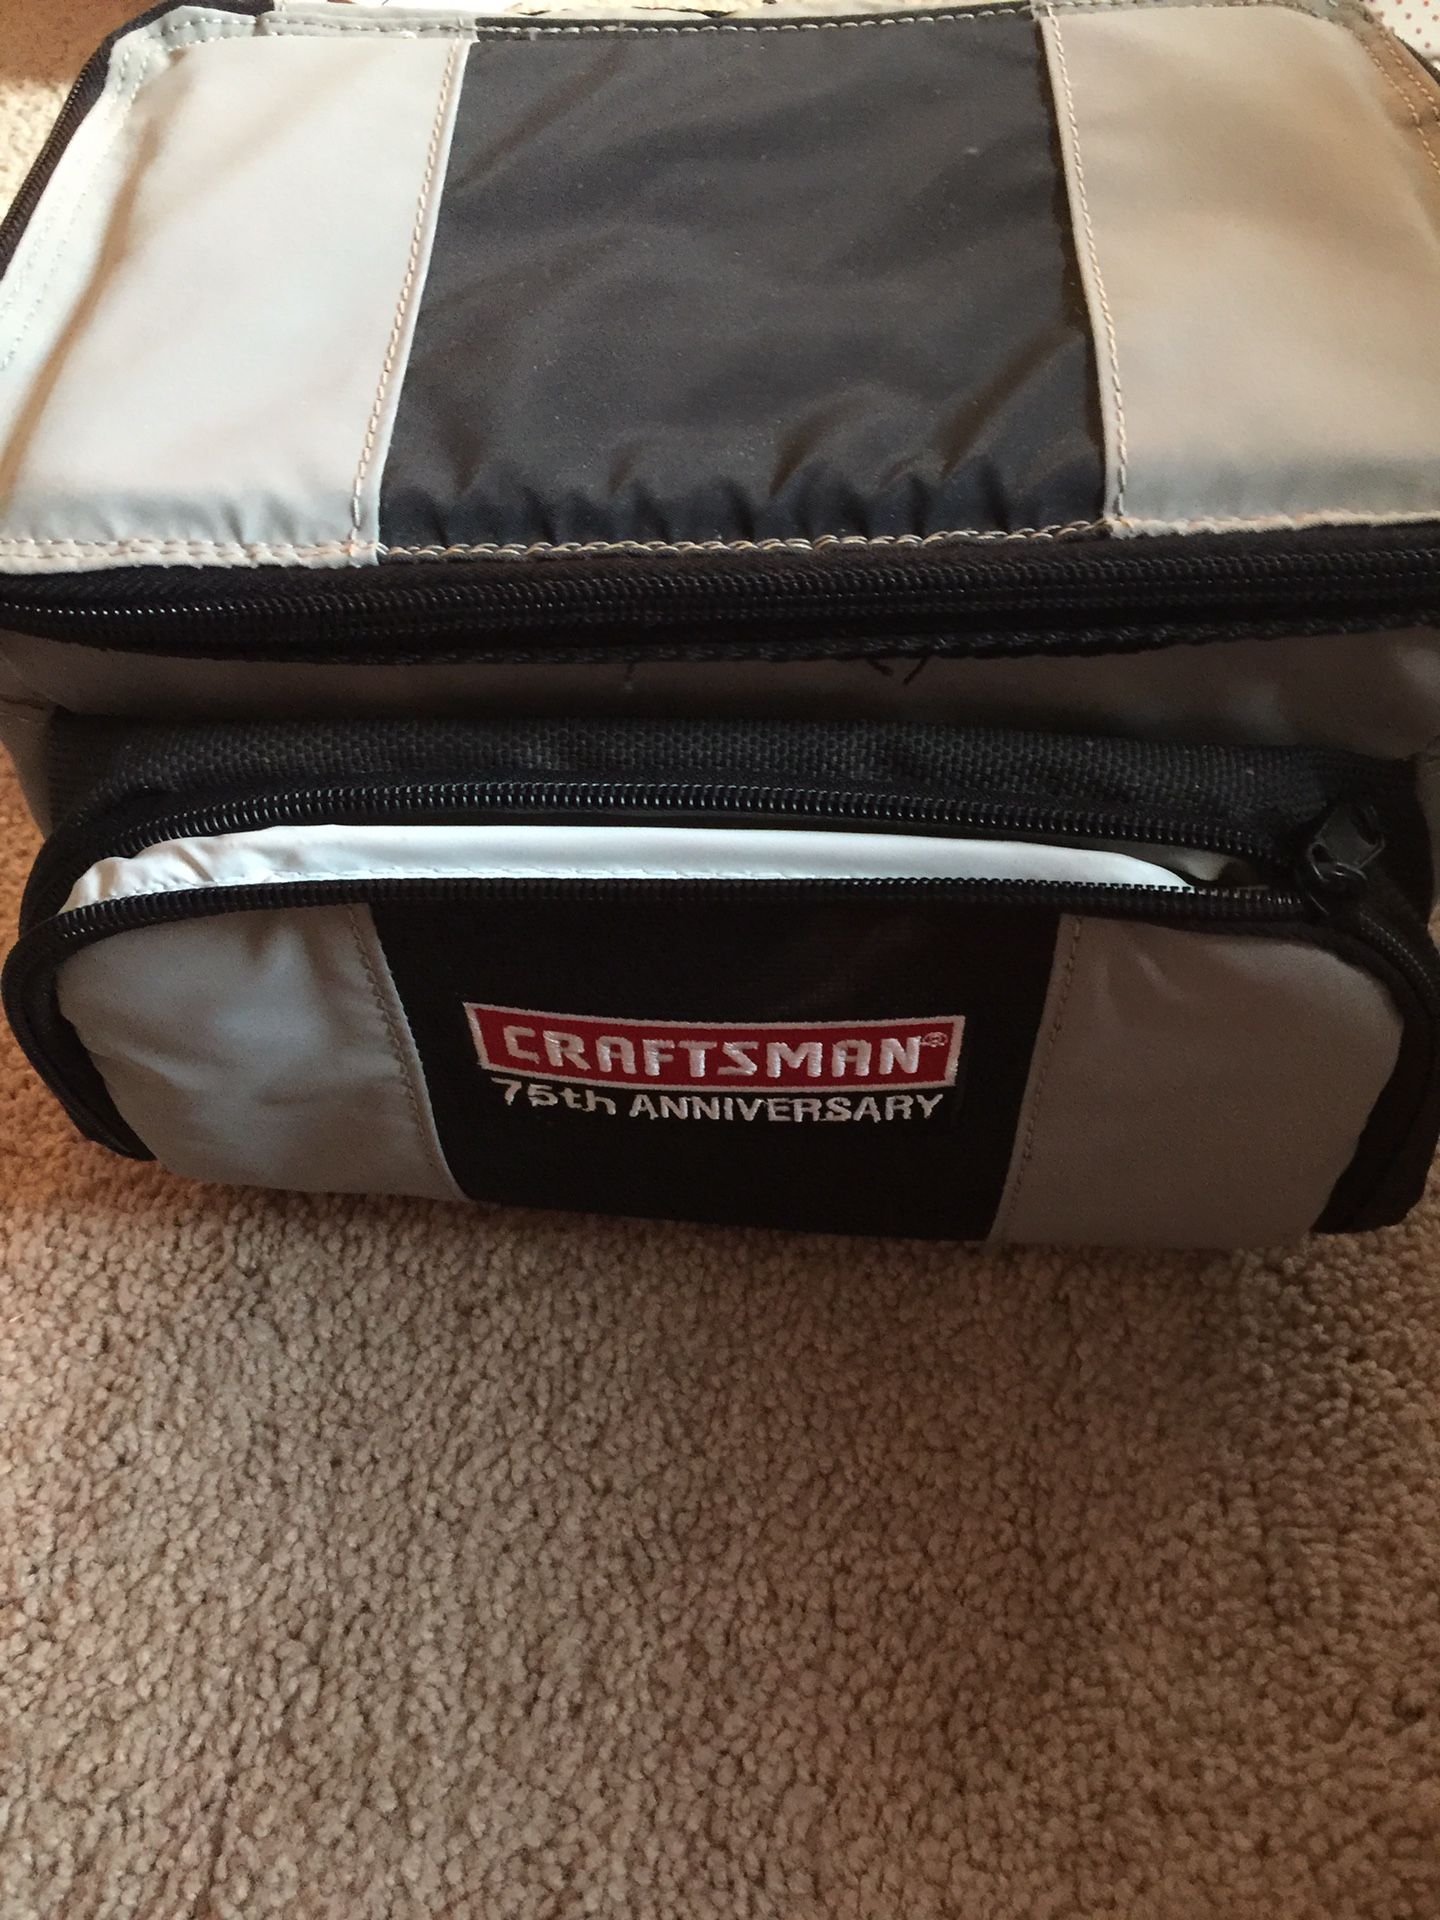 Insulated cooler/lunch box